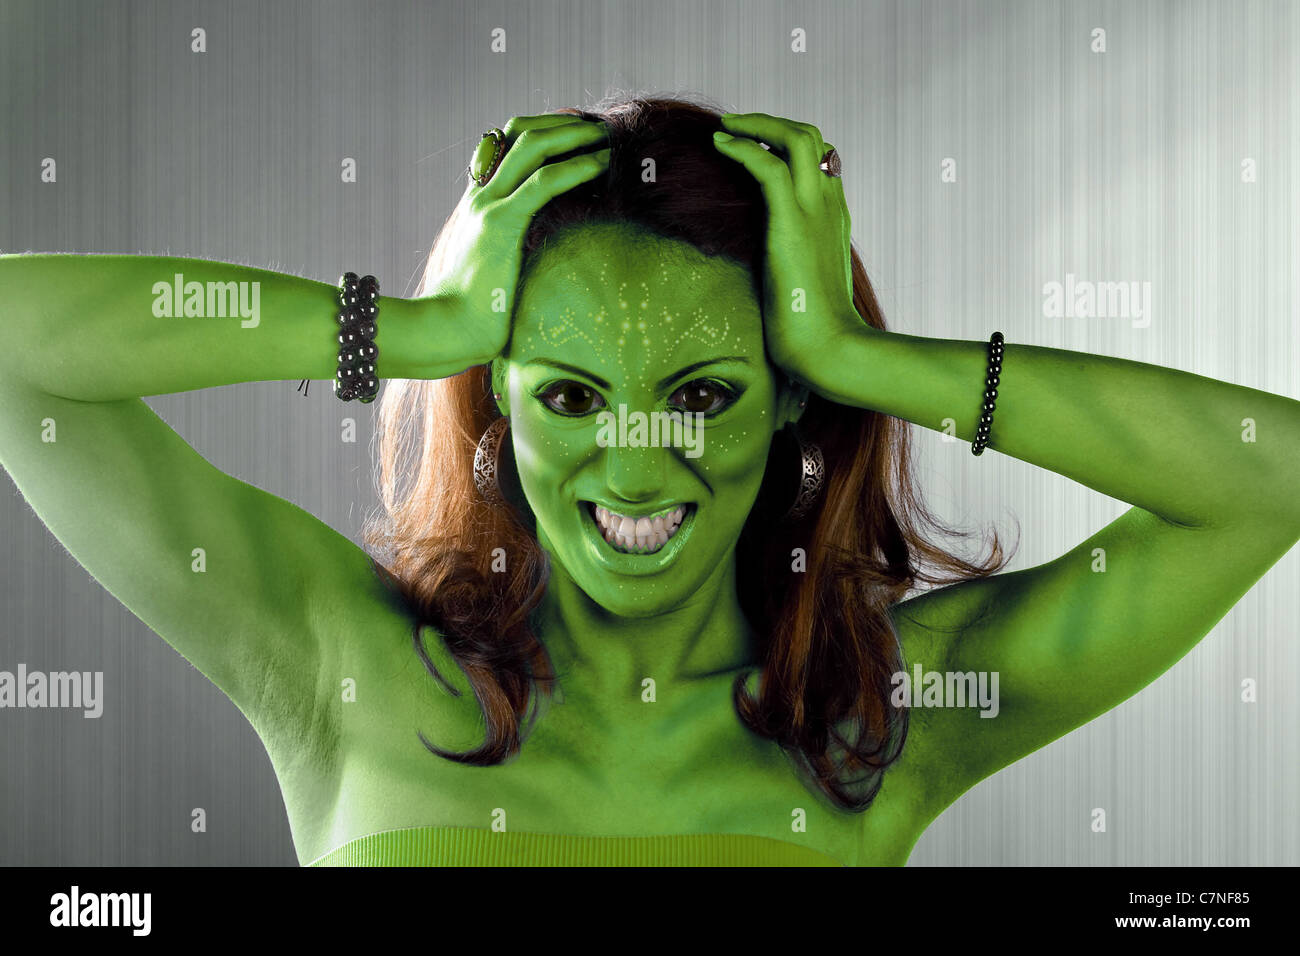 A green alien or Martian woman posing over a silver brushed metal backdrop. Stock Photo